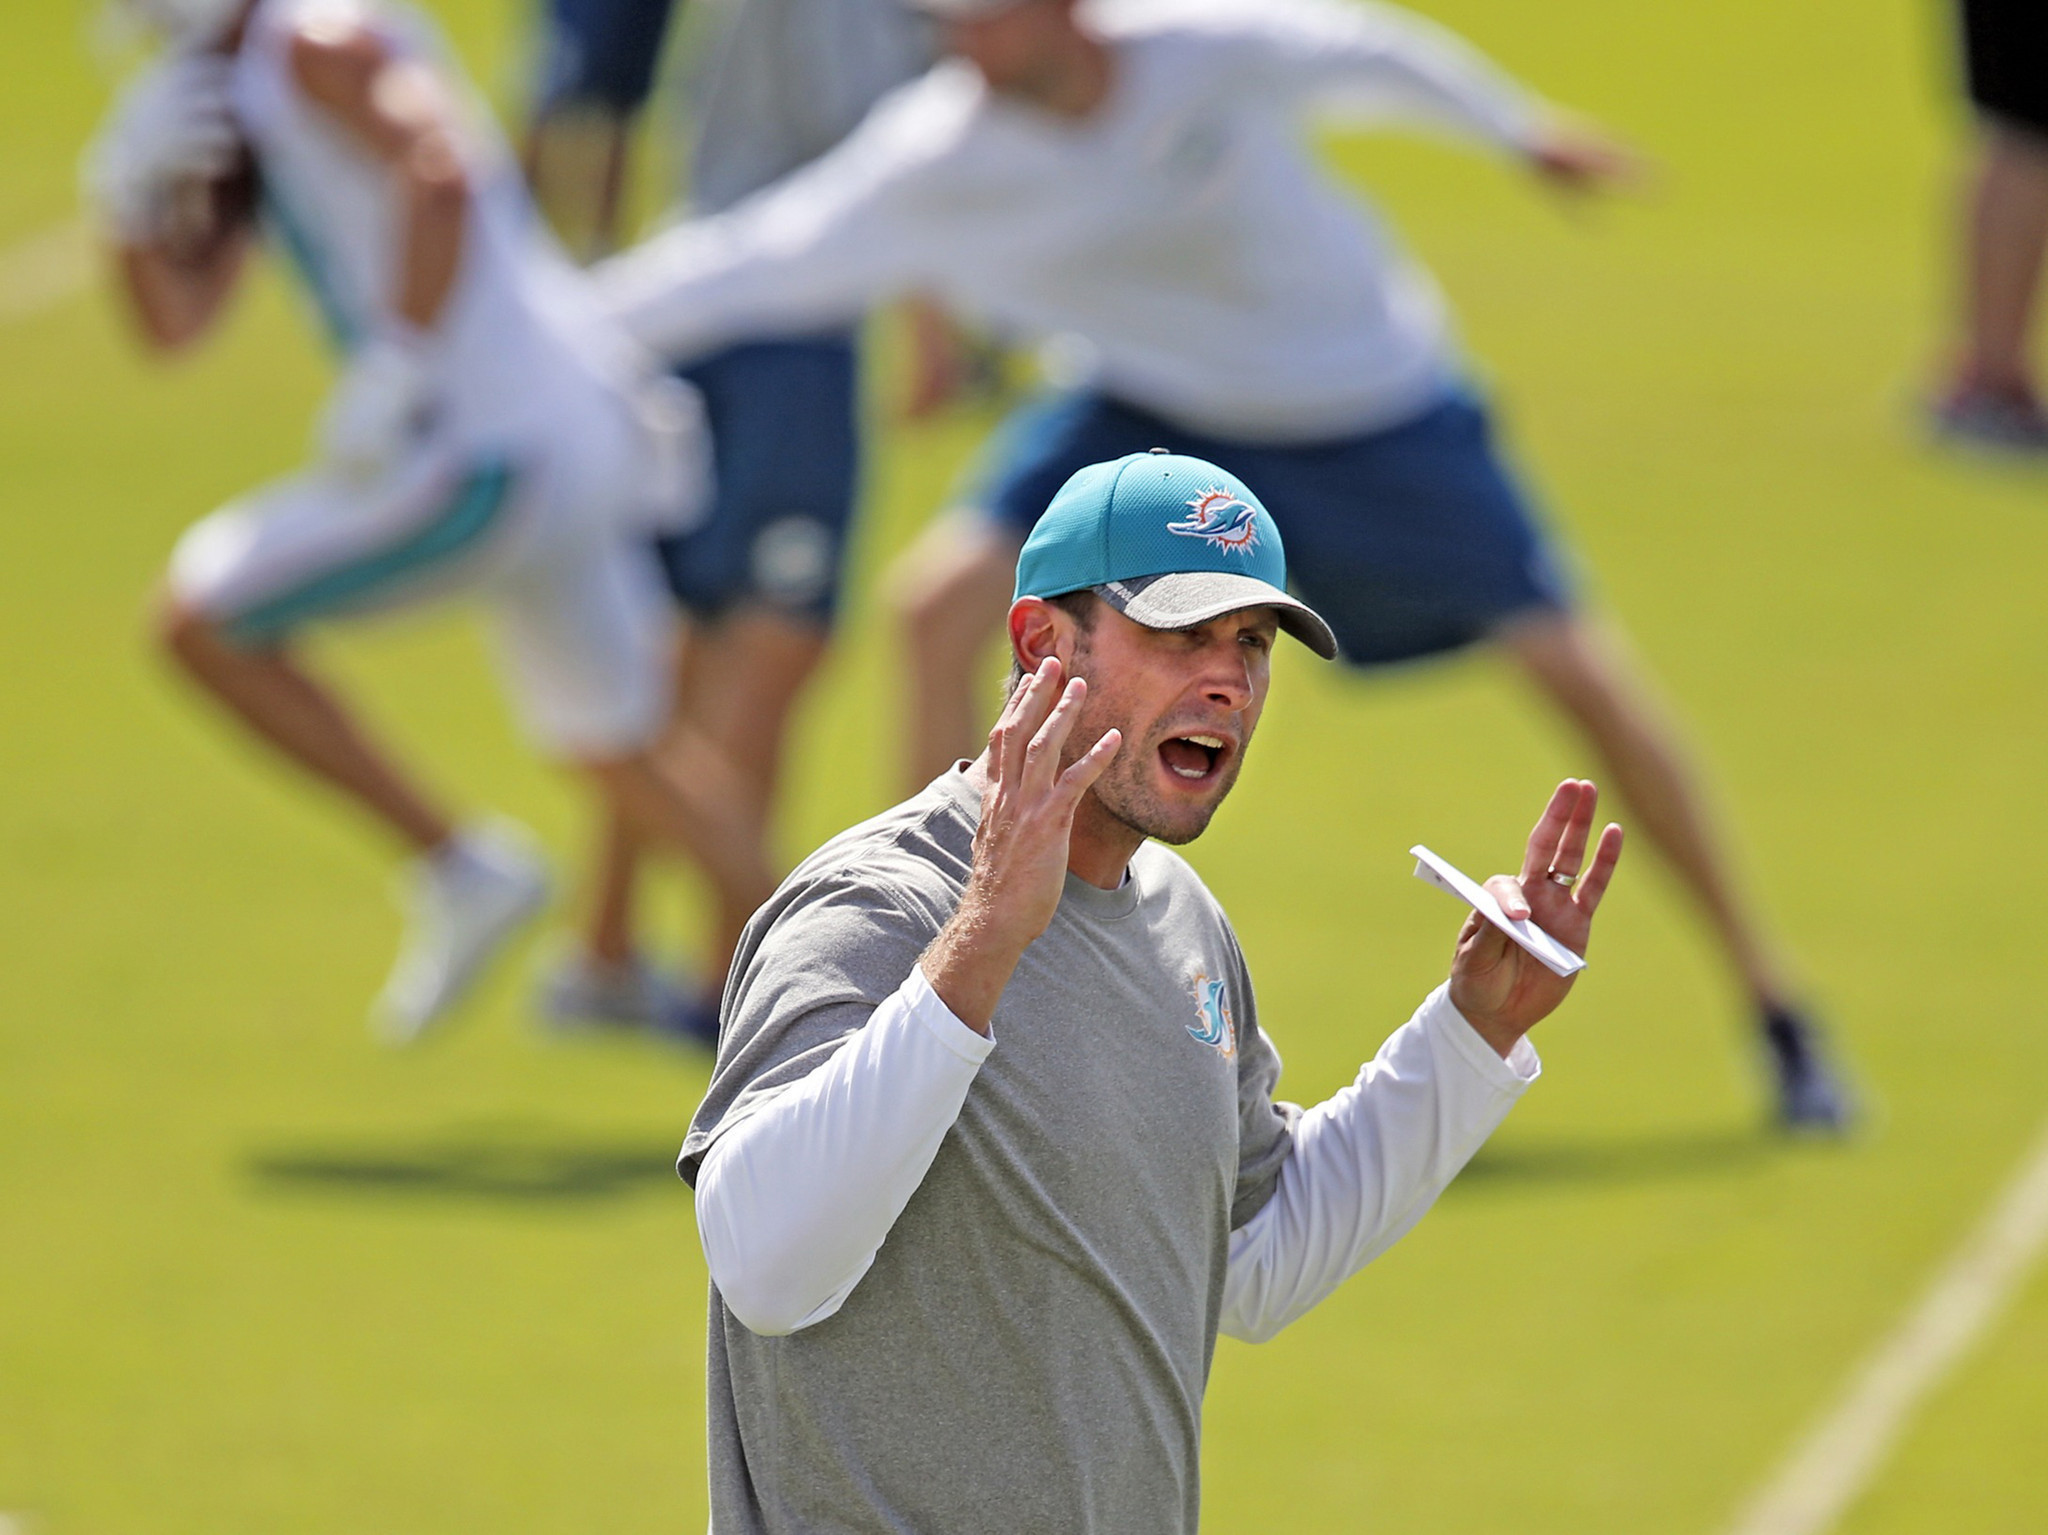 Gase tried discipline through gassers to no avail